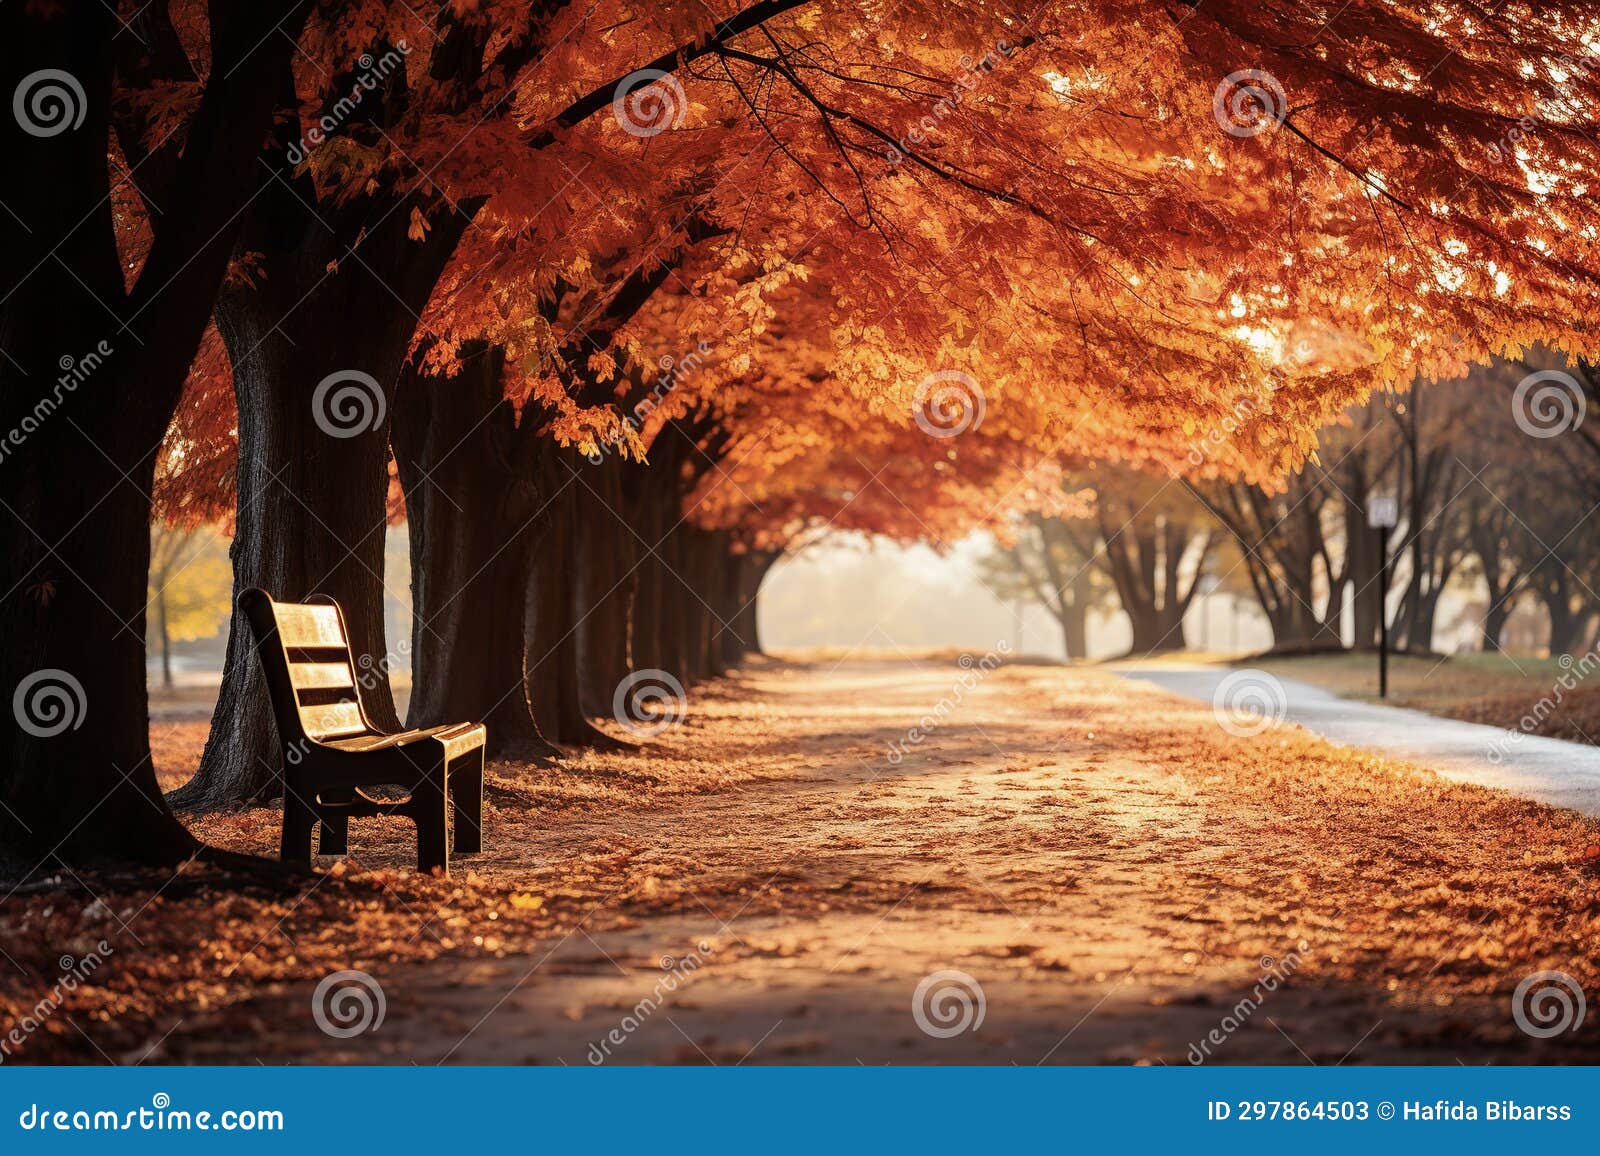 Fall Background Fall Background Wallpaper Fall Background Image Stock ...